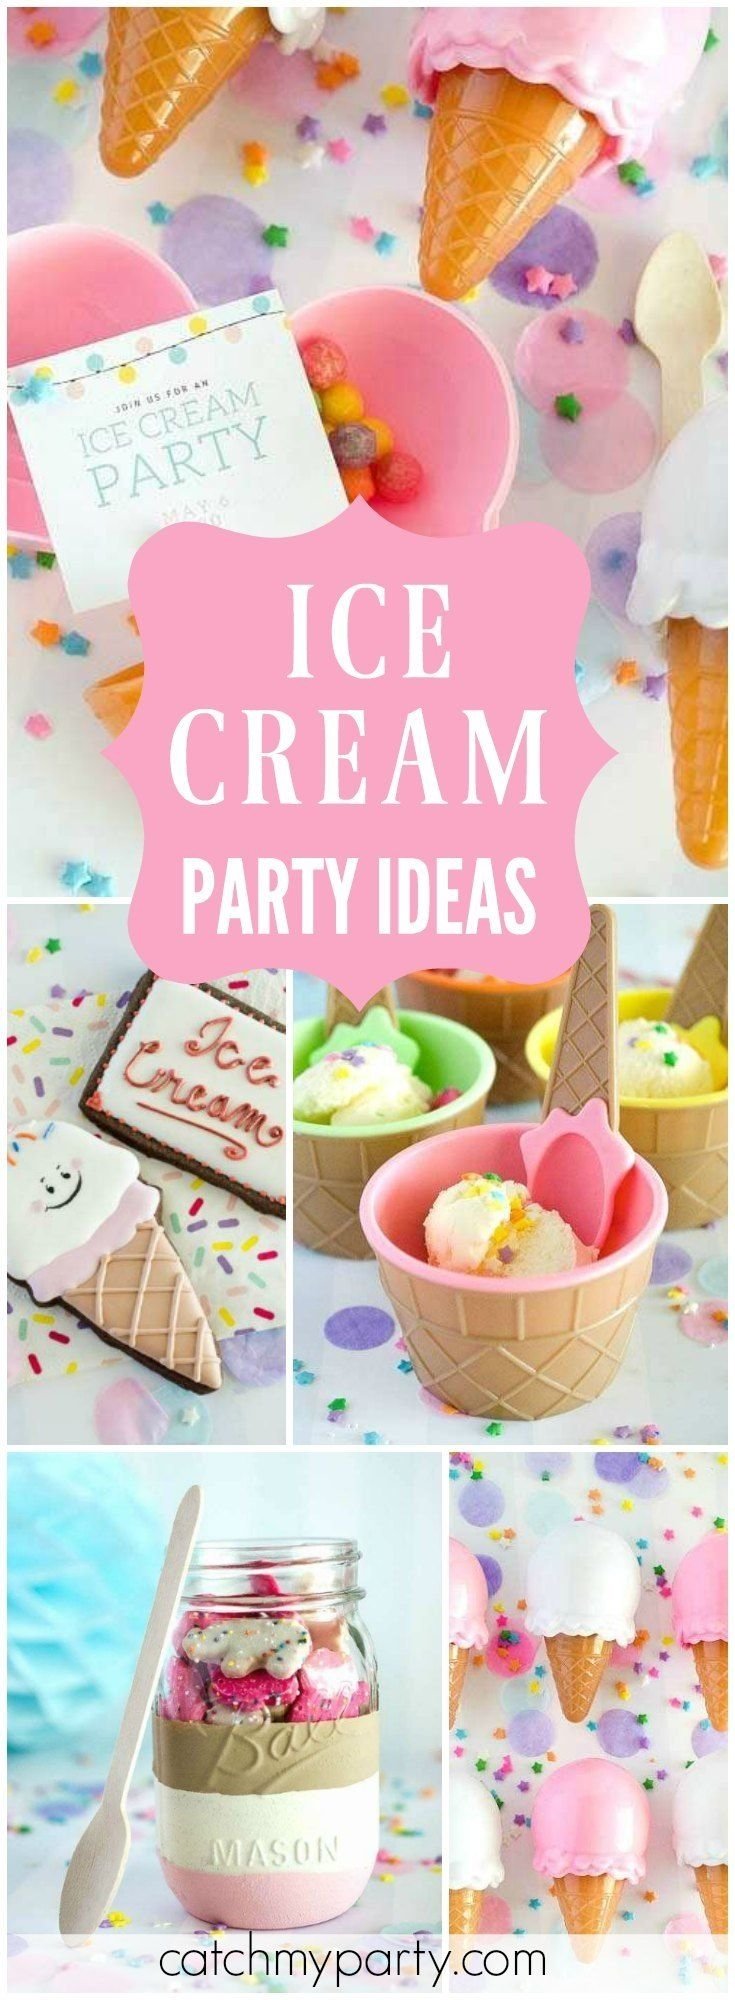 10 Most Recommended Ice Cream Social Party Ideas 411 best ice cream party ideas images on pinterest birthdays 1 2023